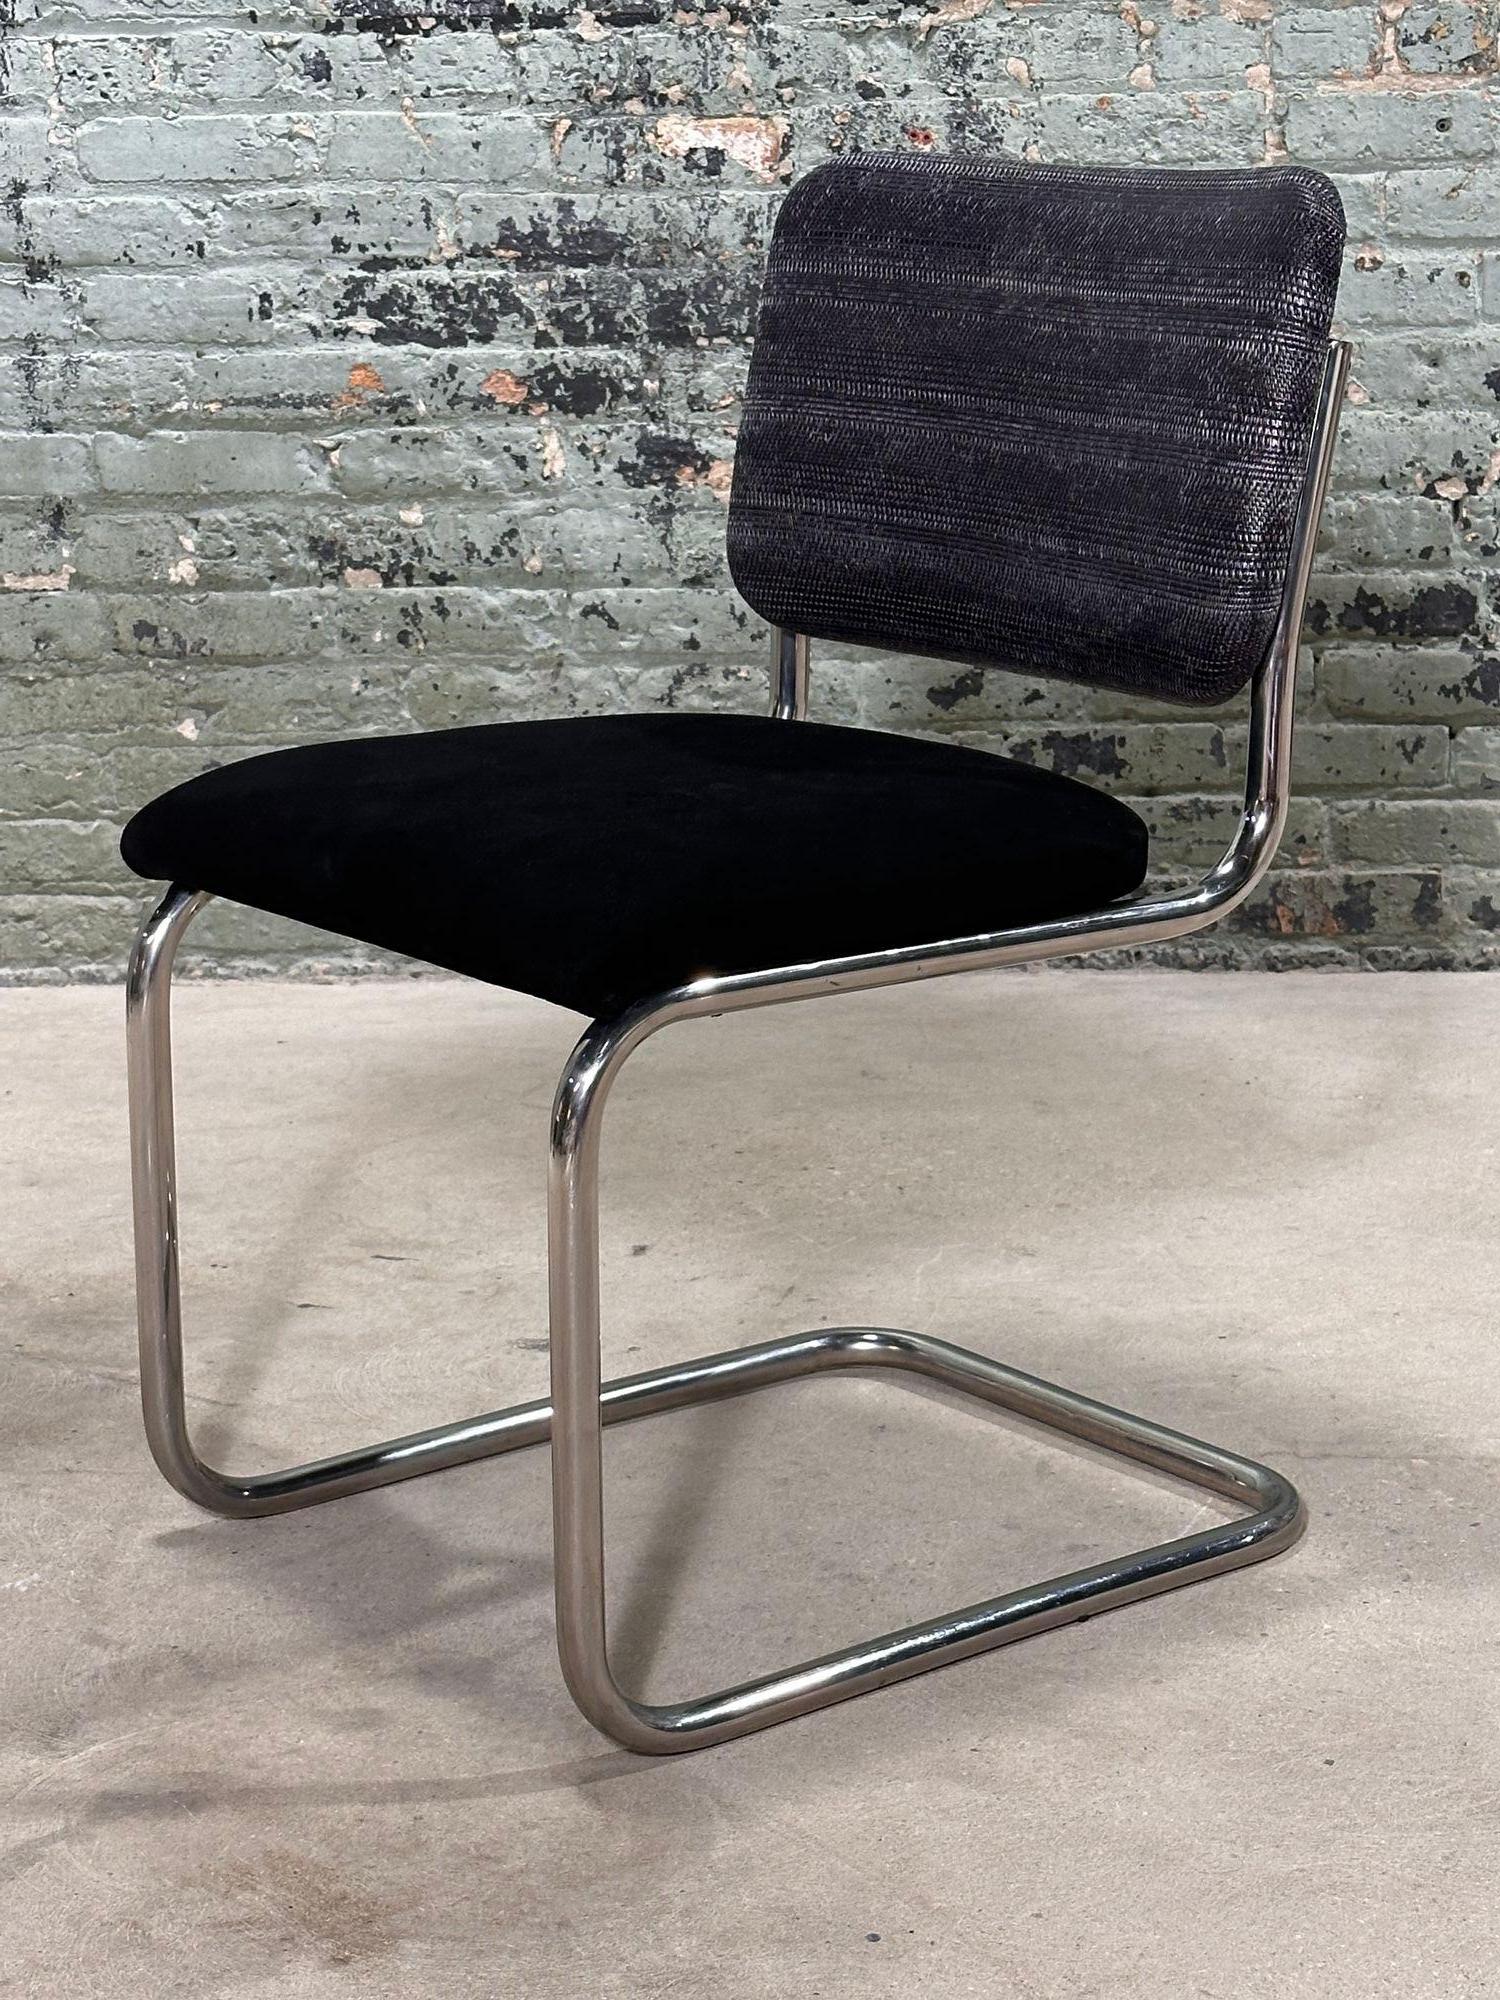 6 Marcel Breuer Cesca Side/Dining Chairs for Knoll, 1980. Dyes hemp and woven leather upholstered backs in the style of Bottega Veneta with black suede seat cushions. Newly upholstered.
Measure 31